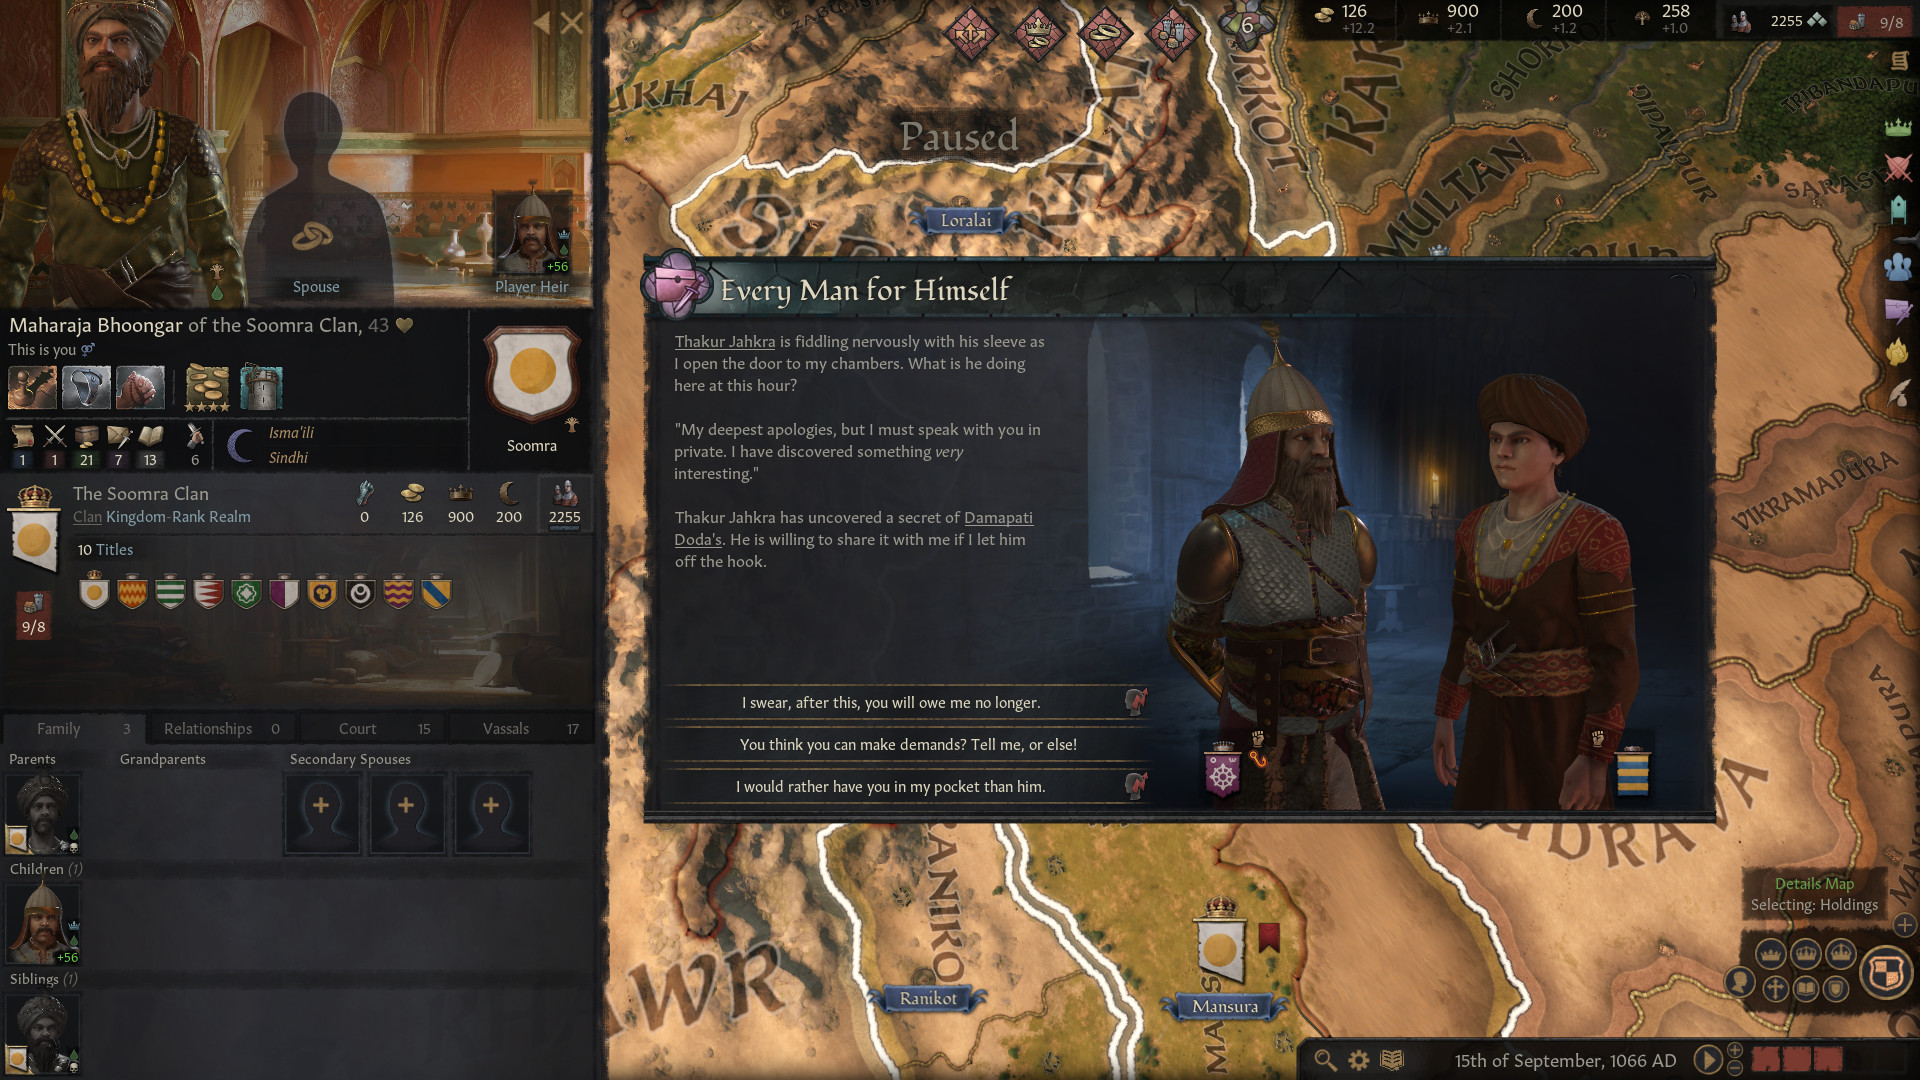 An event in crusader kings 3 one of the best strategy games on PC